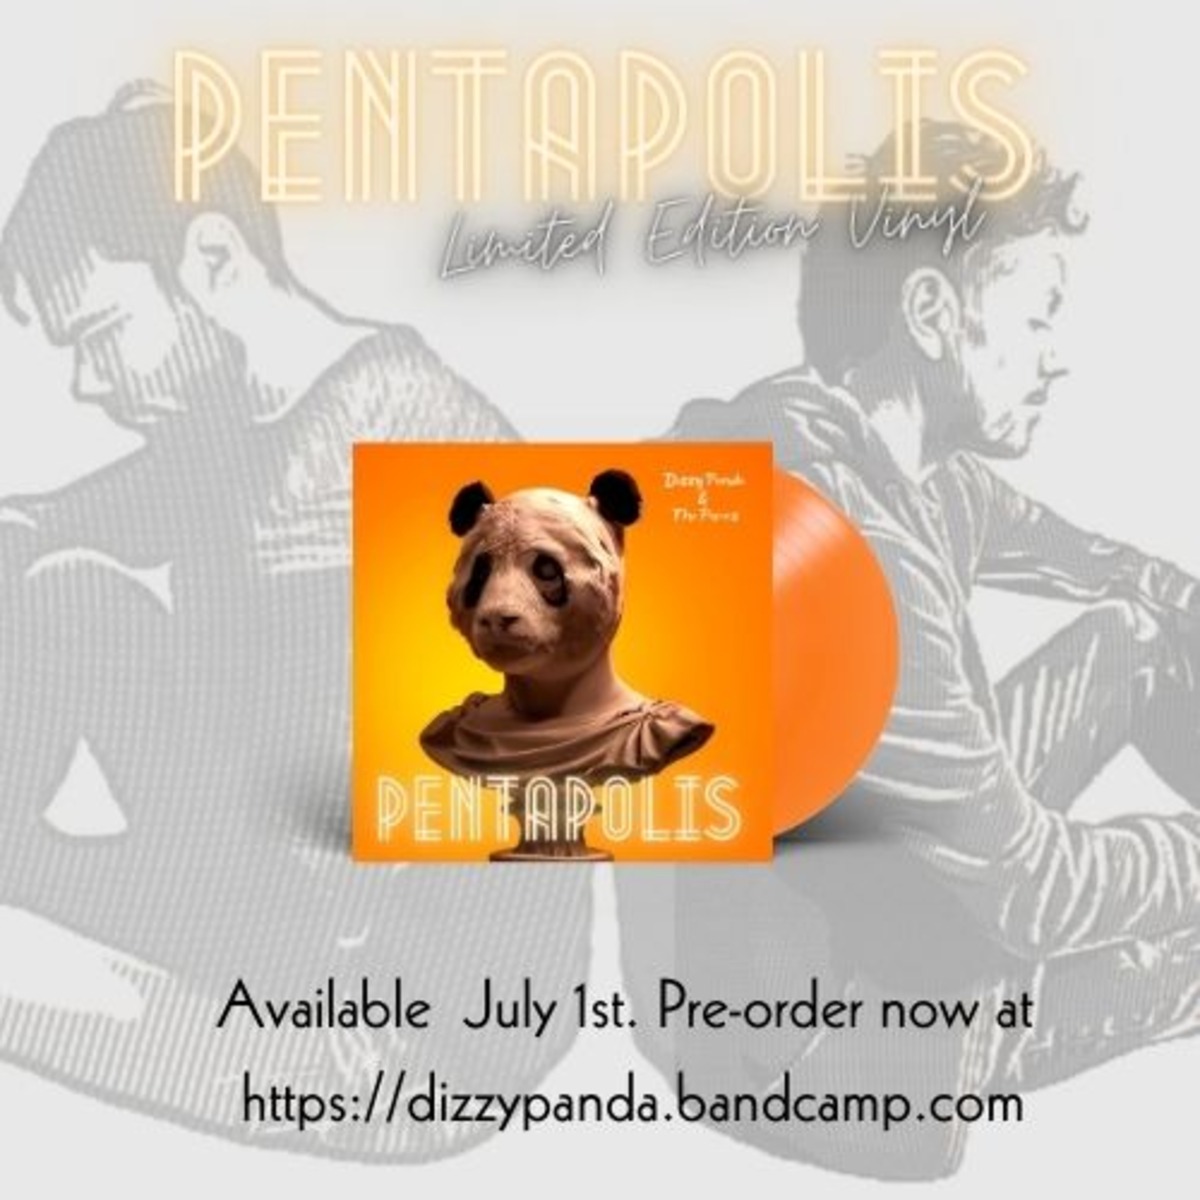 You can now pre-order the vinyl record of the album 'Pentapolis' with The Perics. It's a very limited edition vinyl and ships around July 1st. Check out our bandcamp page for more. Link in bio. #limitededition #vinyl #pentapolis #ordernow #bandcamp #indiemusic #vinyllovers